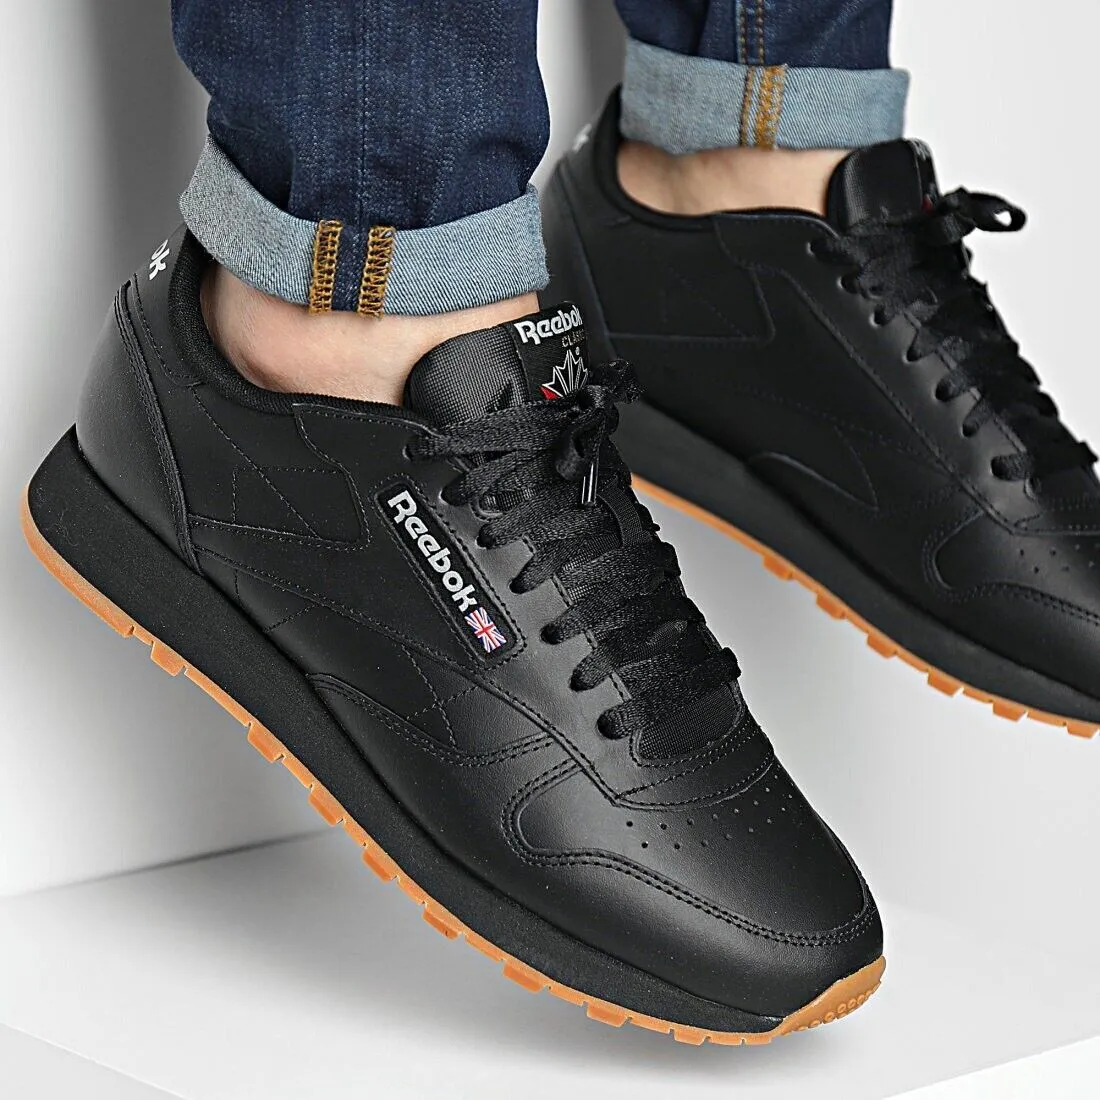 Vejhus Baron protest Reebok Classic Leather Black Gum GY0954 Shoes Sneakers Sizes 8 - 13 | eBay